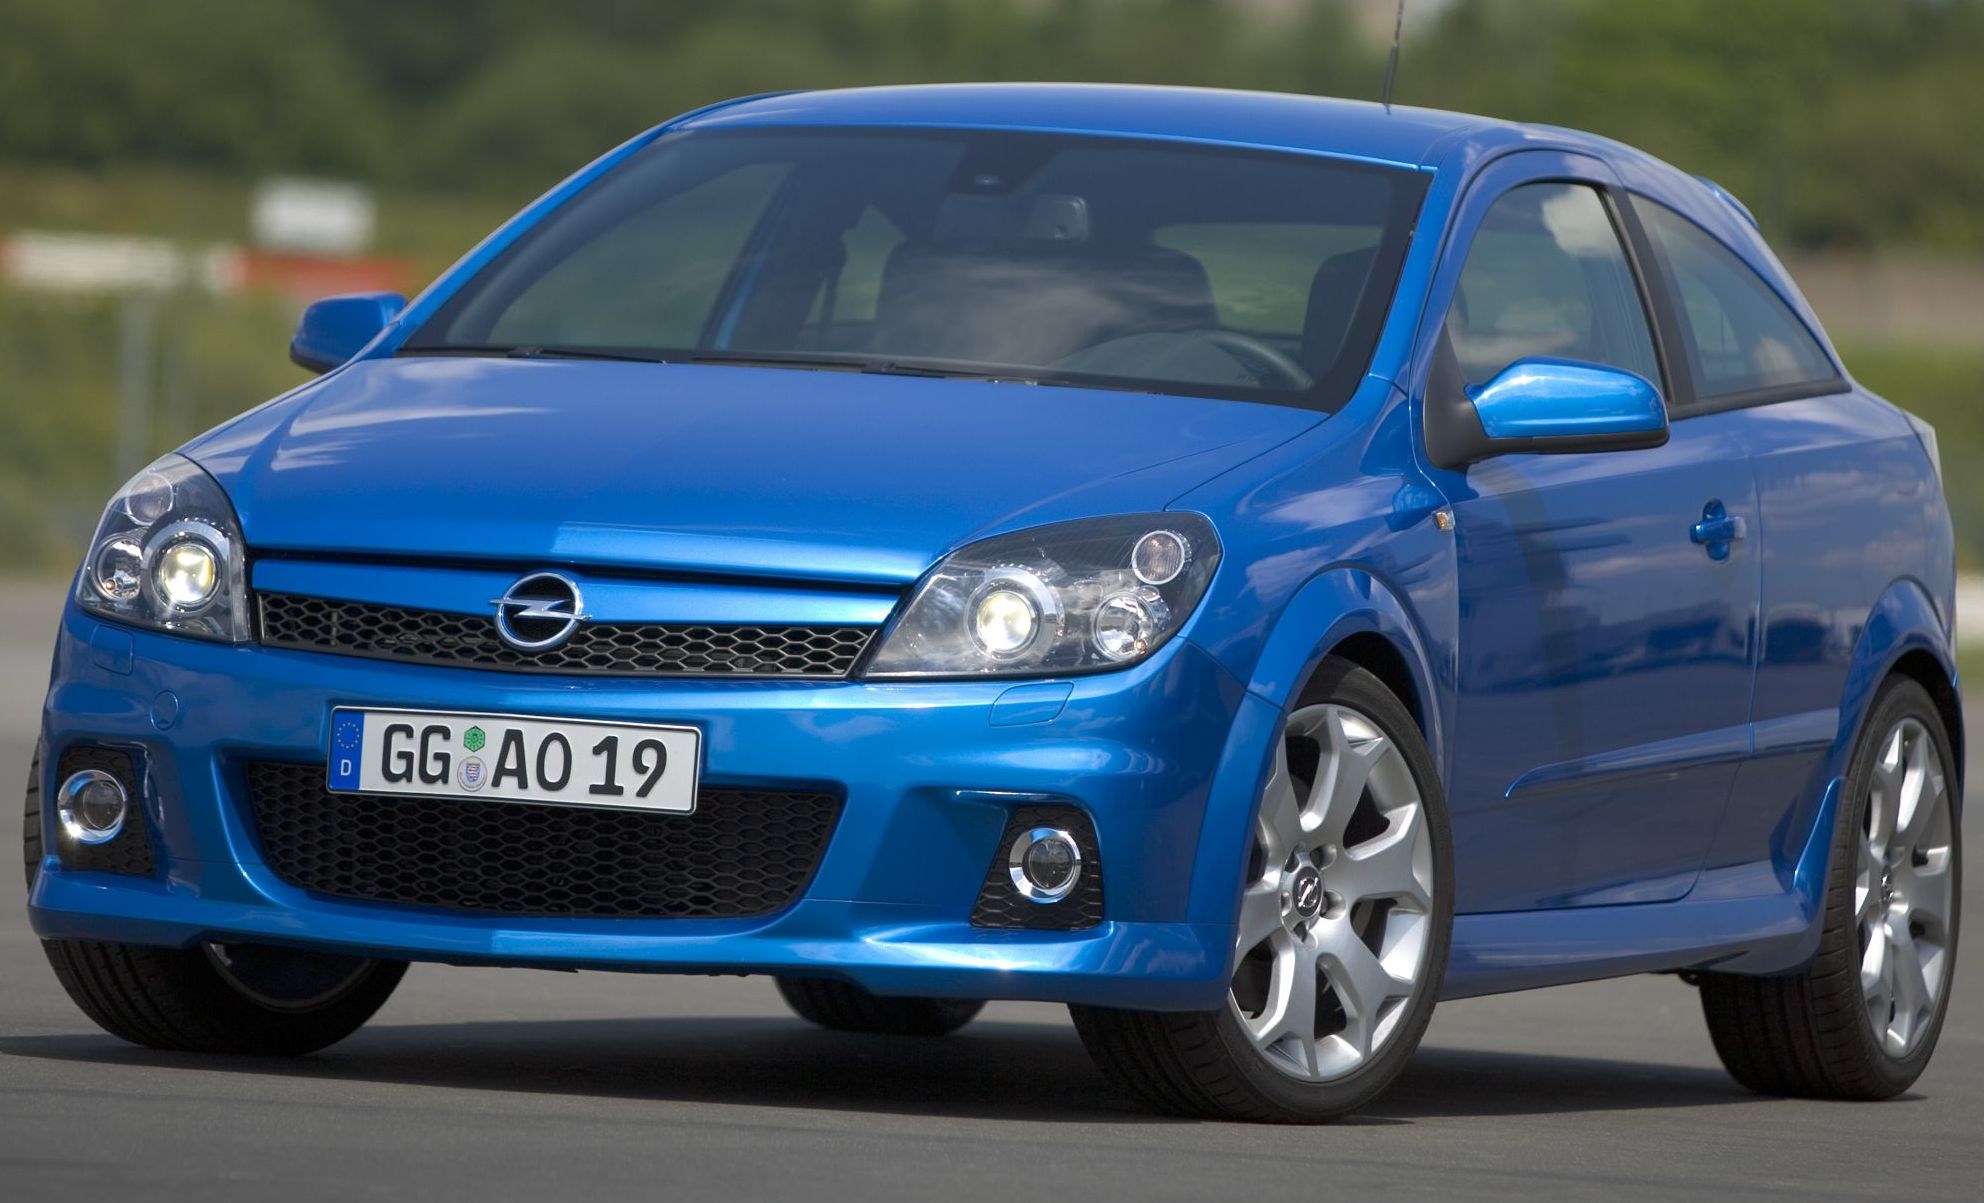 Opel Corsa 1.4 Twinport Edition 2005 - Specs, Review & Tests